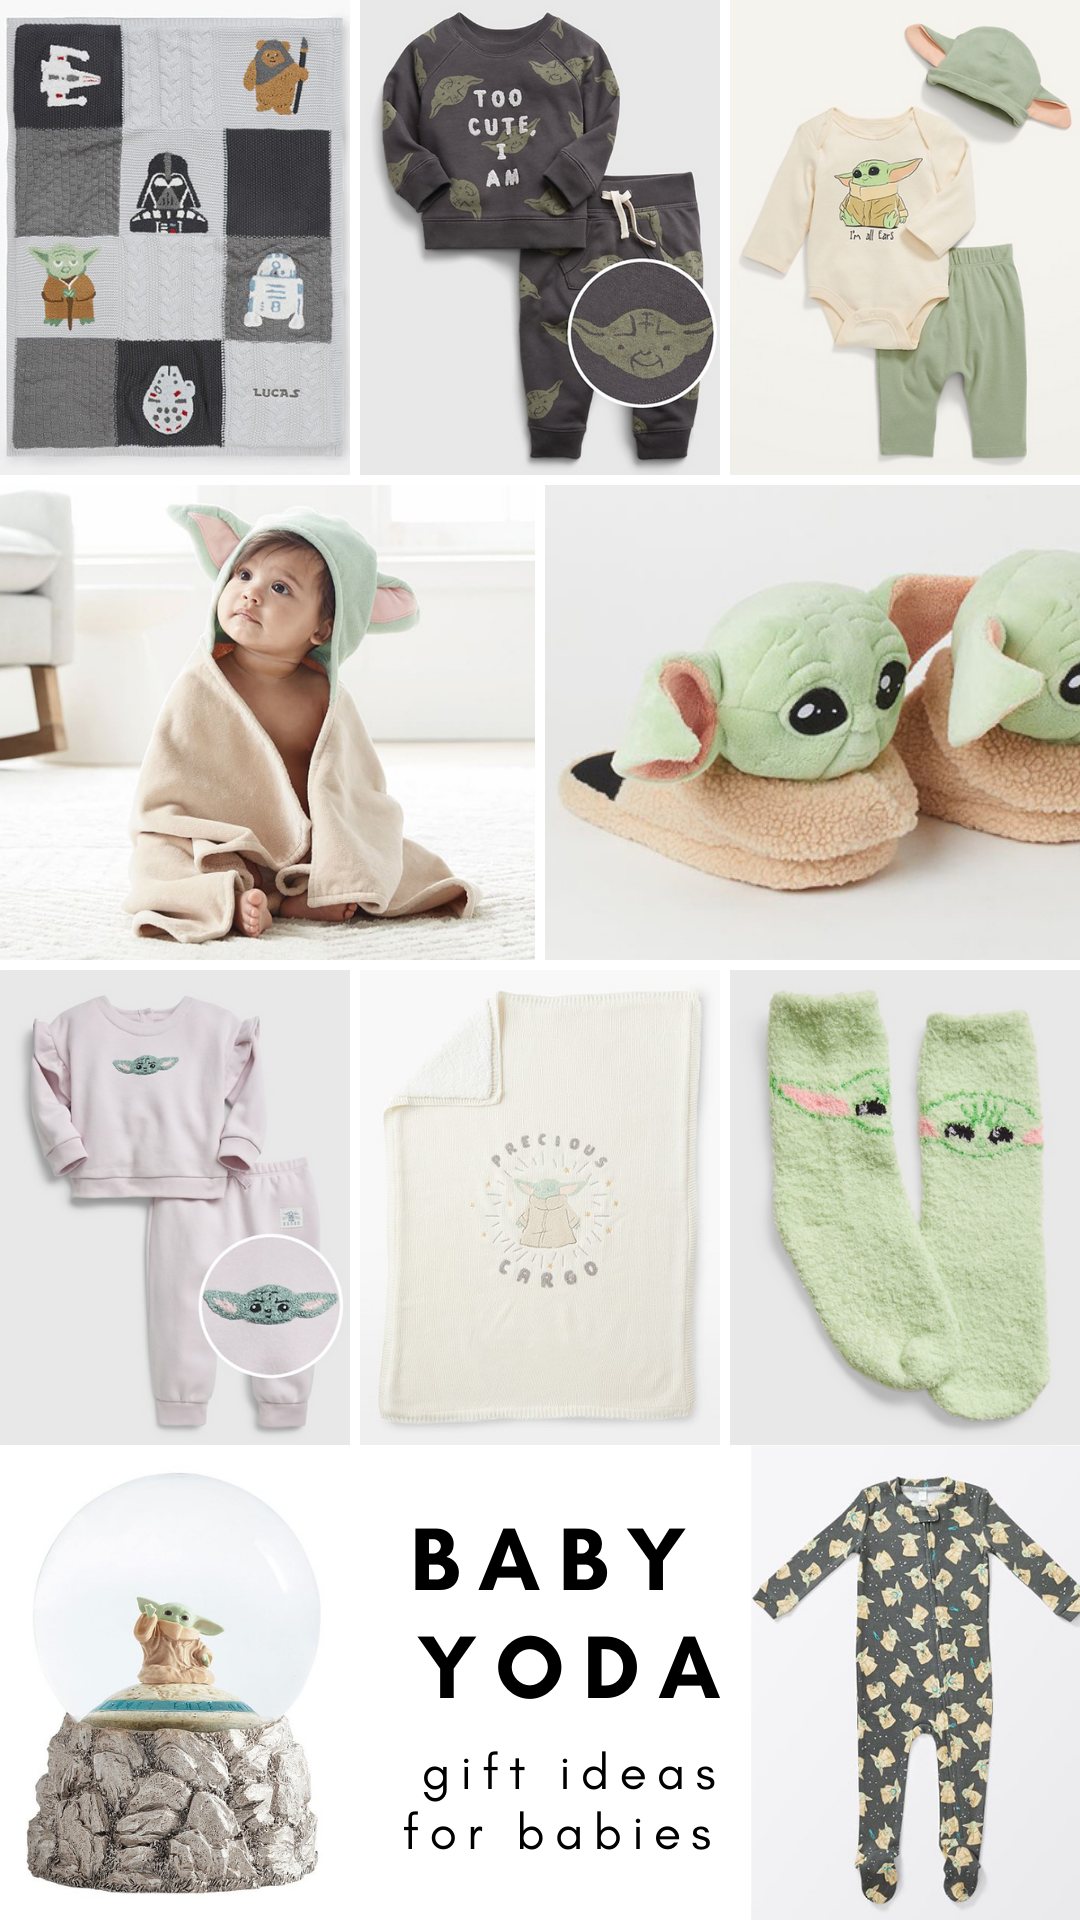 Baby Yoda gift ideas for babies